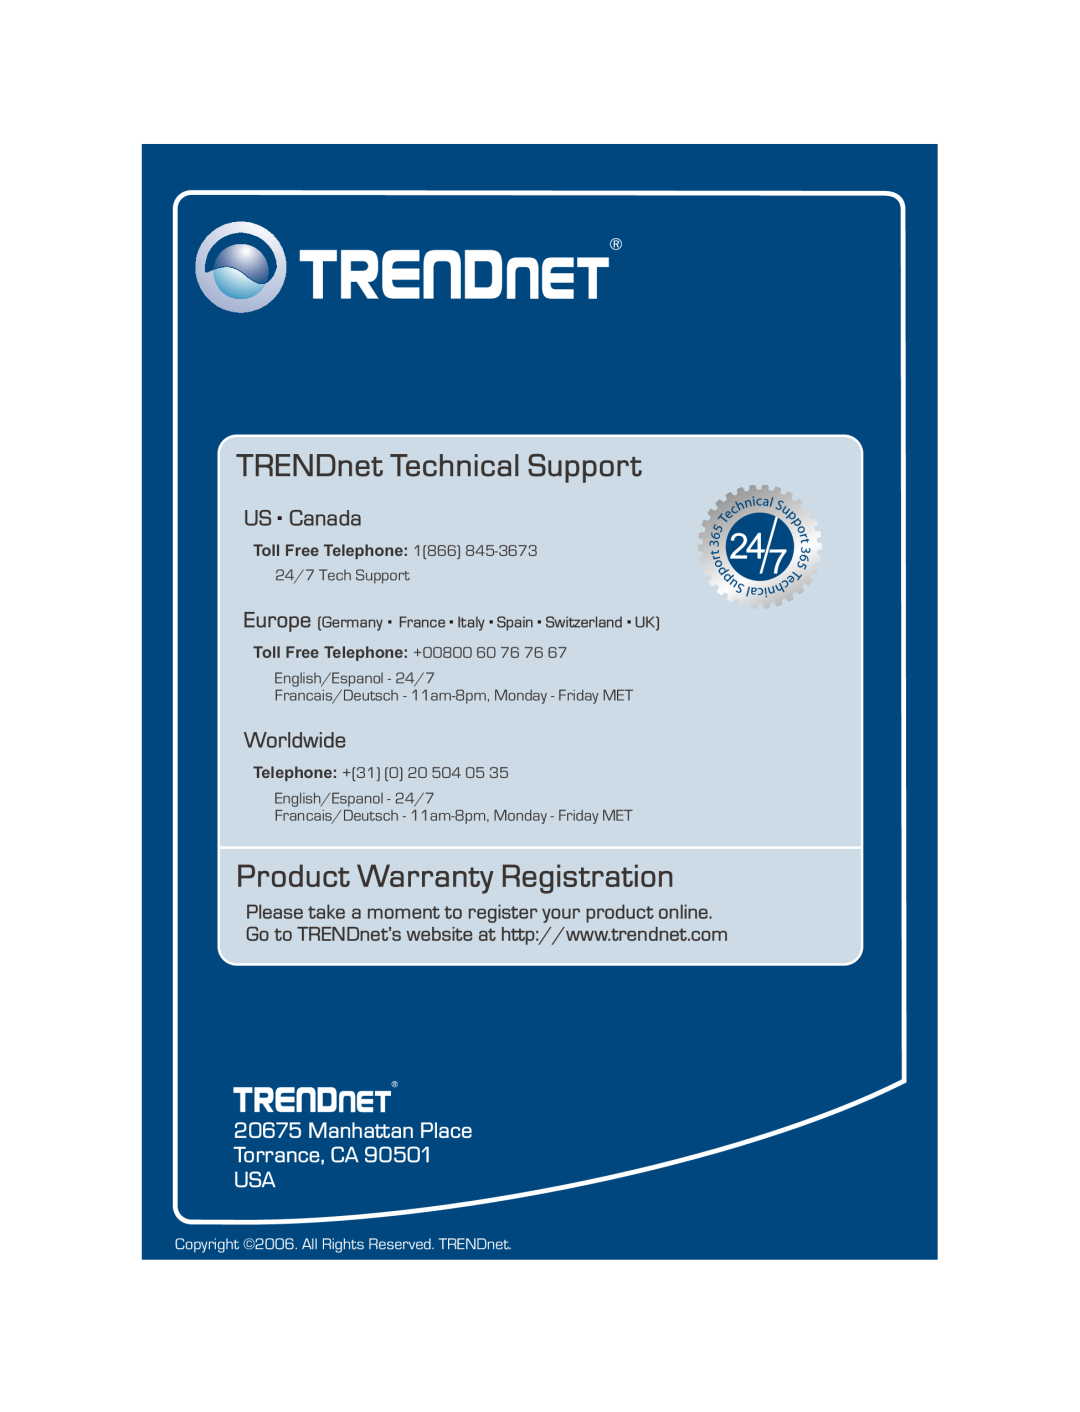 TRENDnet TE100-S16 TRENDnet Technical Support, Product Warranty Registration, US . Canada, Worldwide, Toll Free Telephone 